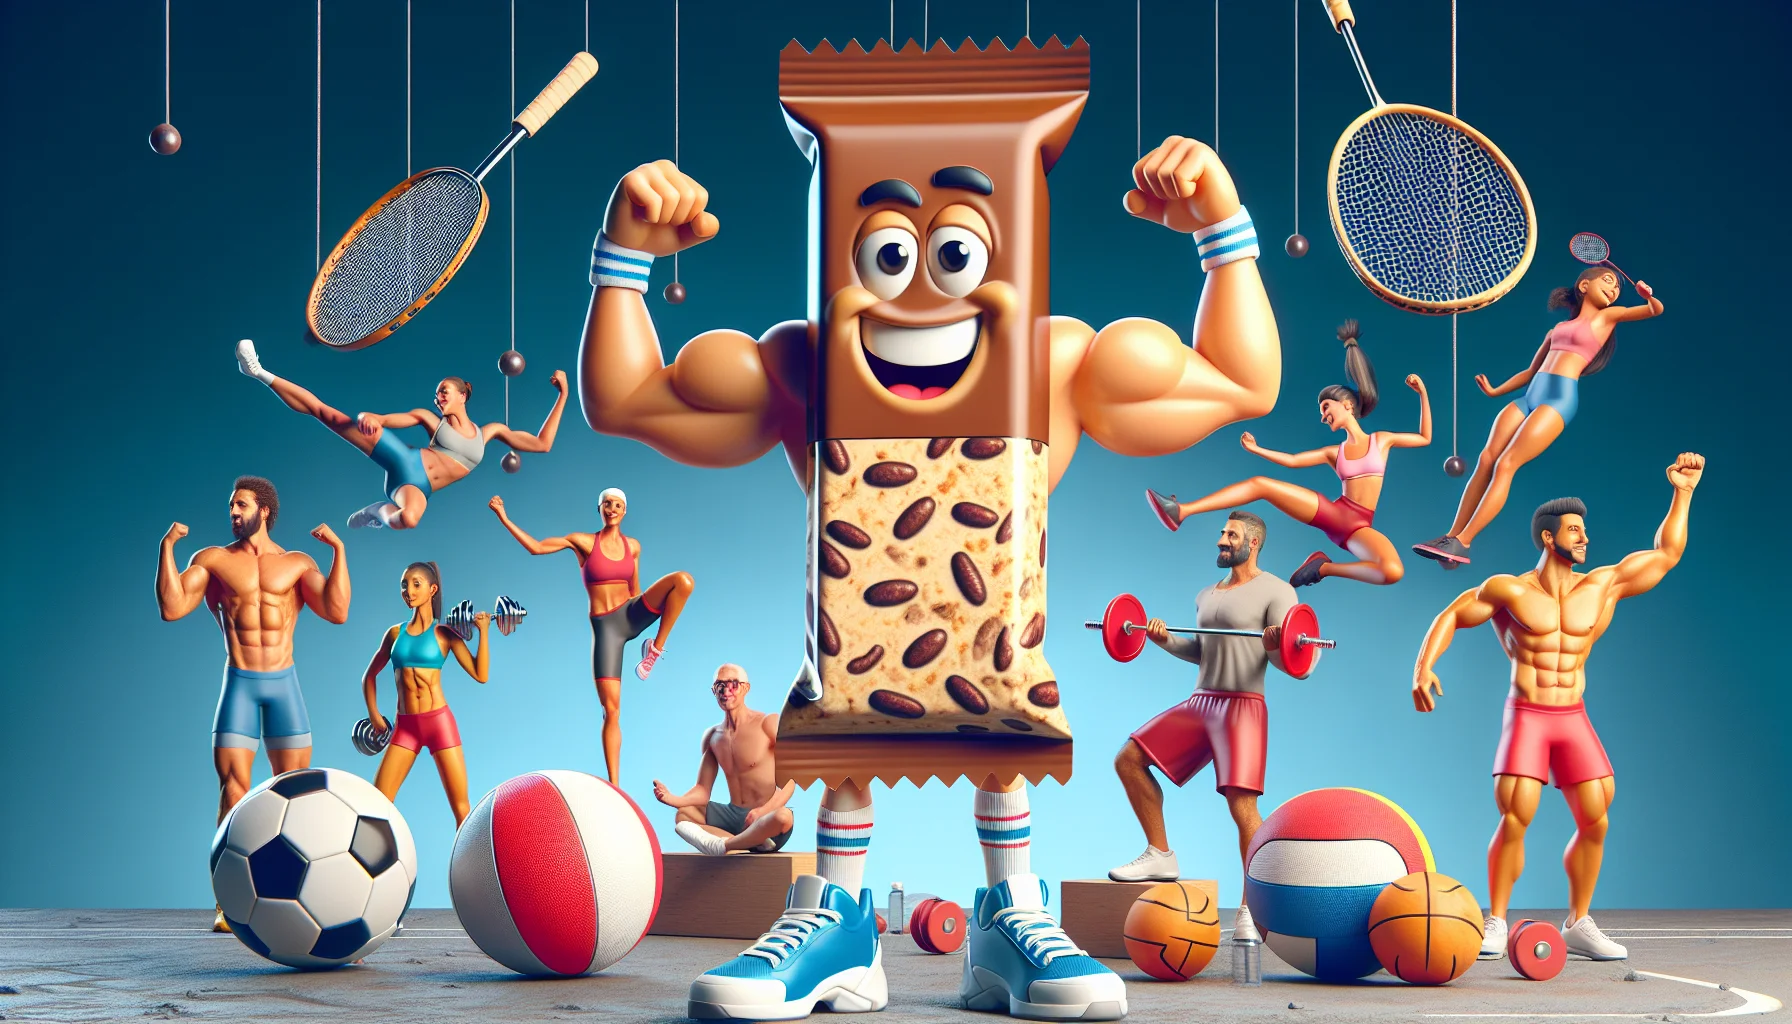 Generate a humorous and realistic image of a protein bar character, anthropomorphized with flexing muscular arms and a confident grin. Surrounding the character, there is a lively sports environment with gymnasium elements such as dumbbells, exercise balls, and crossed badminton rackets. In the background, include silhouettes of various athletes, embodying diversity in gender and descent - male and female, Caucasian, Hispanic, Middle-Eastern, South Asian, demonstrating various sports activities enthusiastically. The mood of the image should encourage the balanced use of sports supplements.